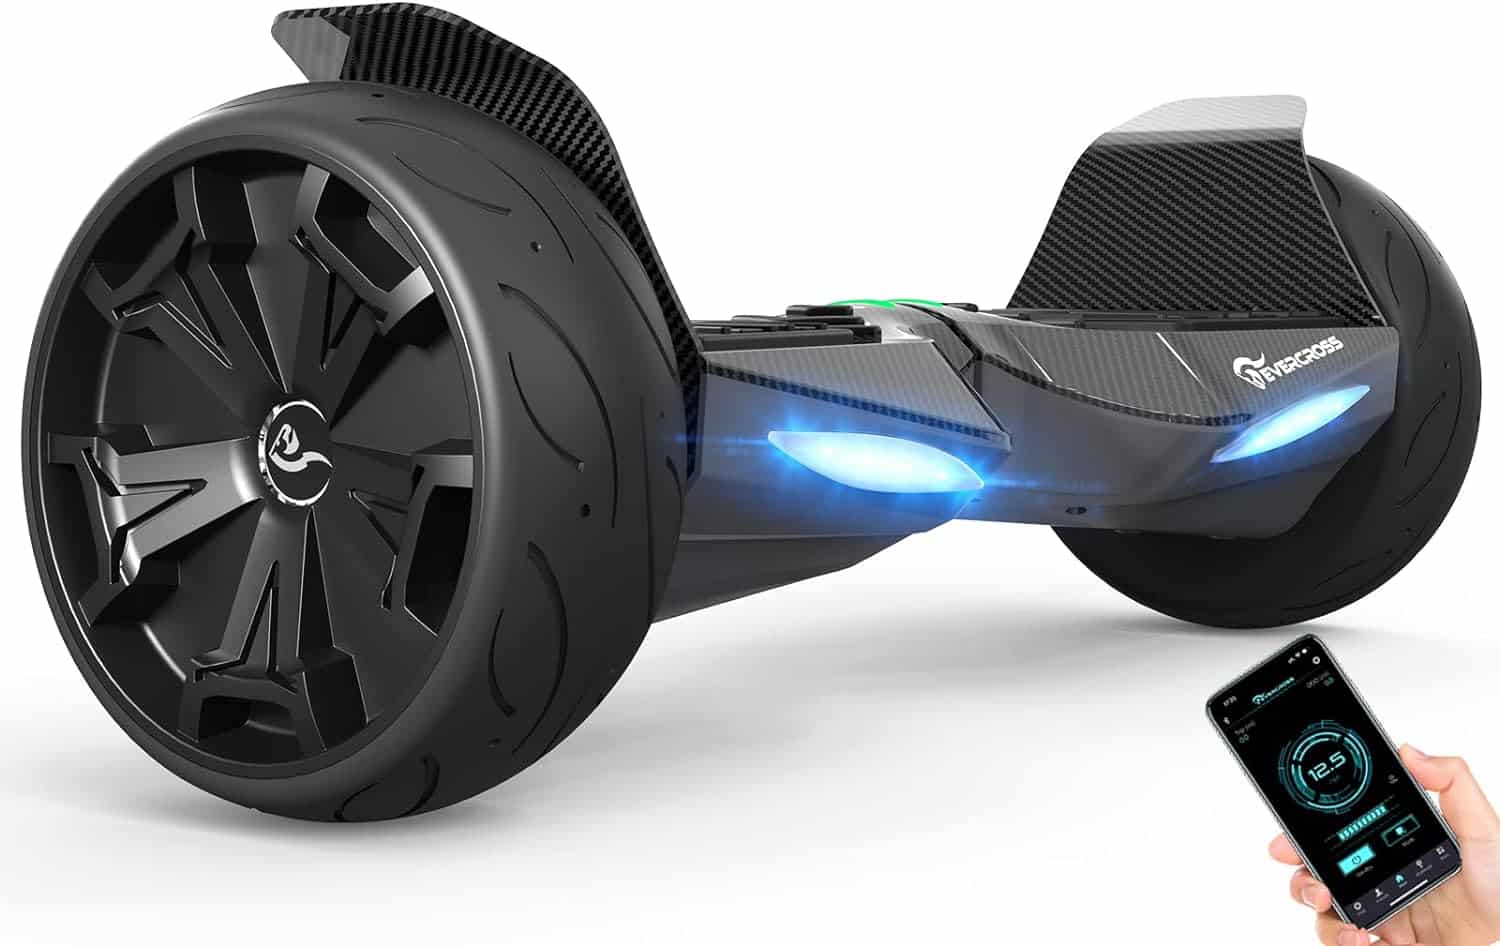 Evercross EV5 Hoverboards Linked to Fire in New York City